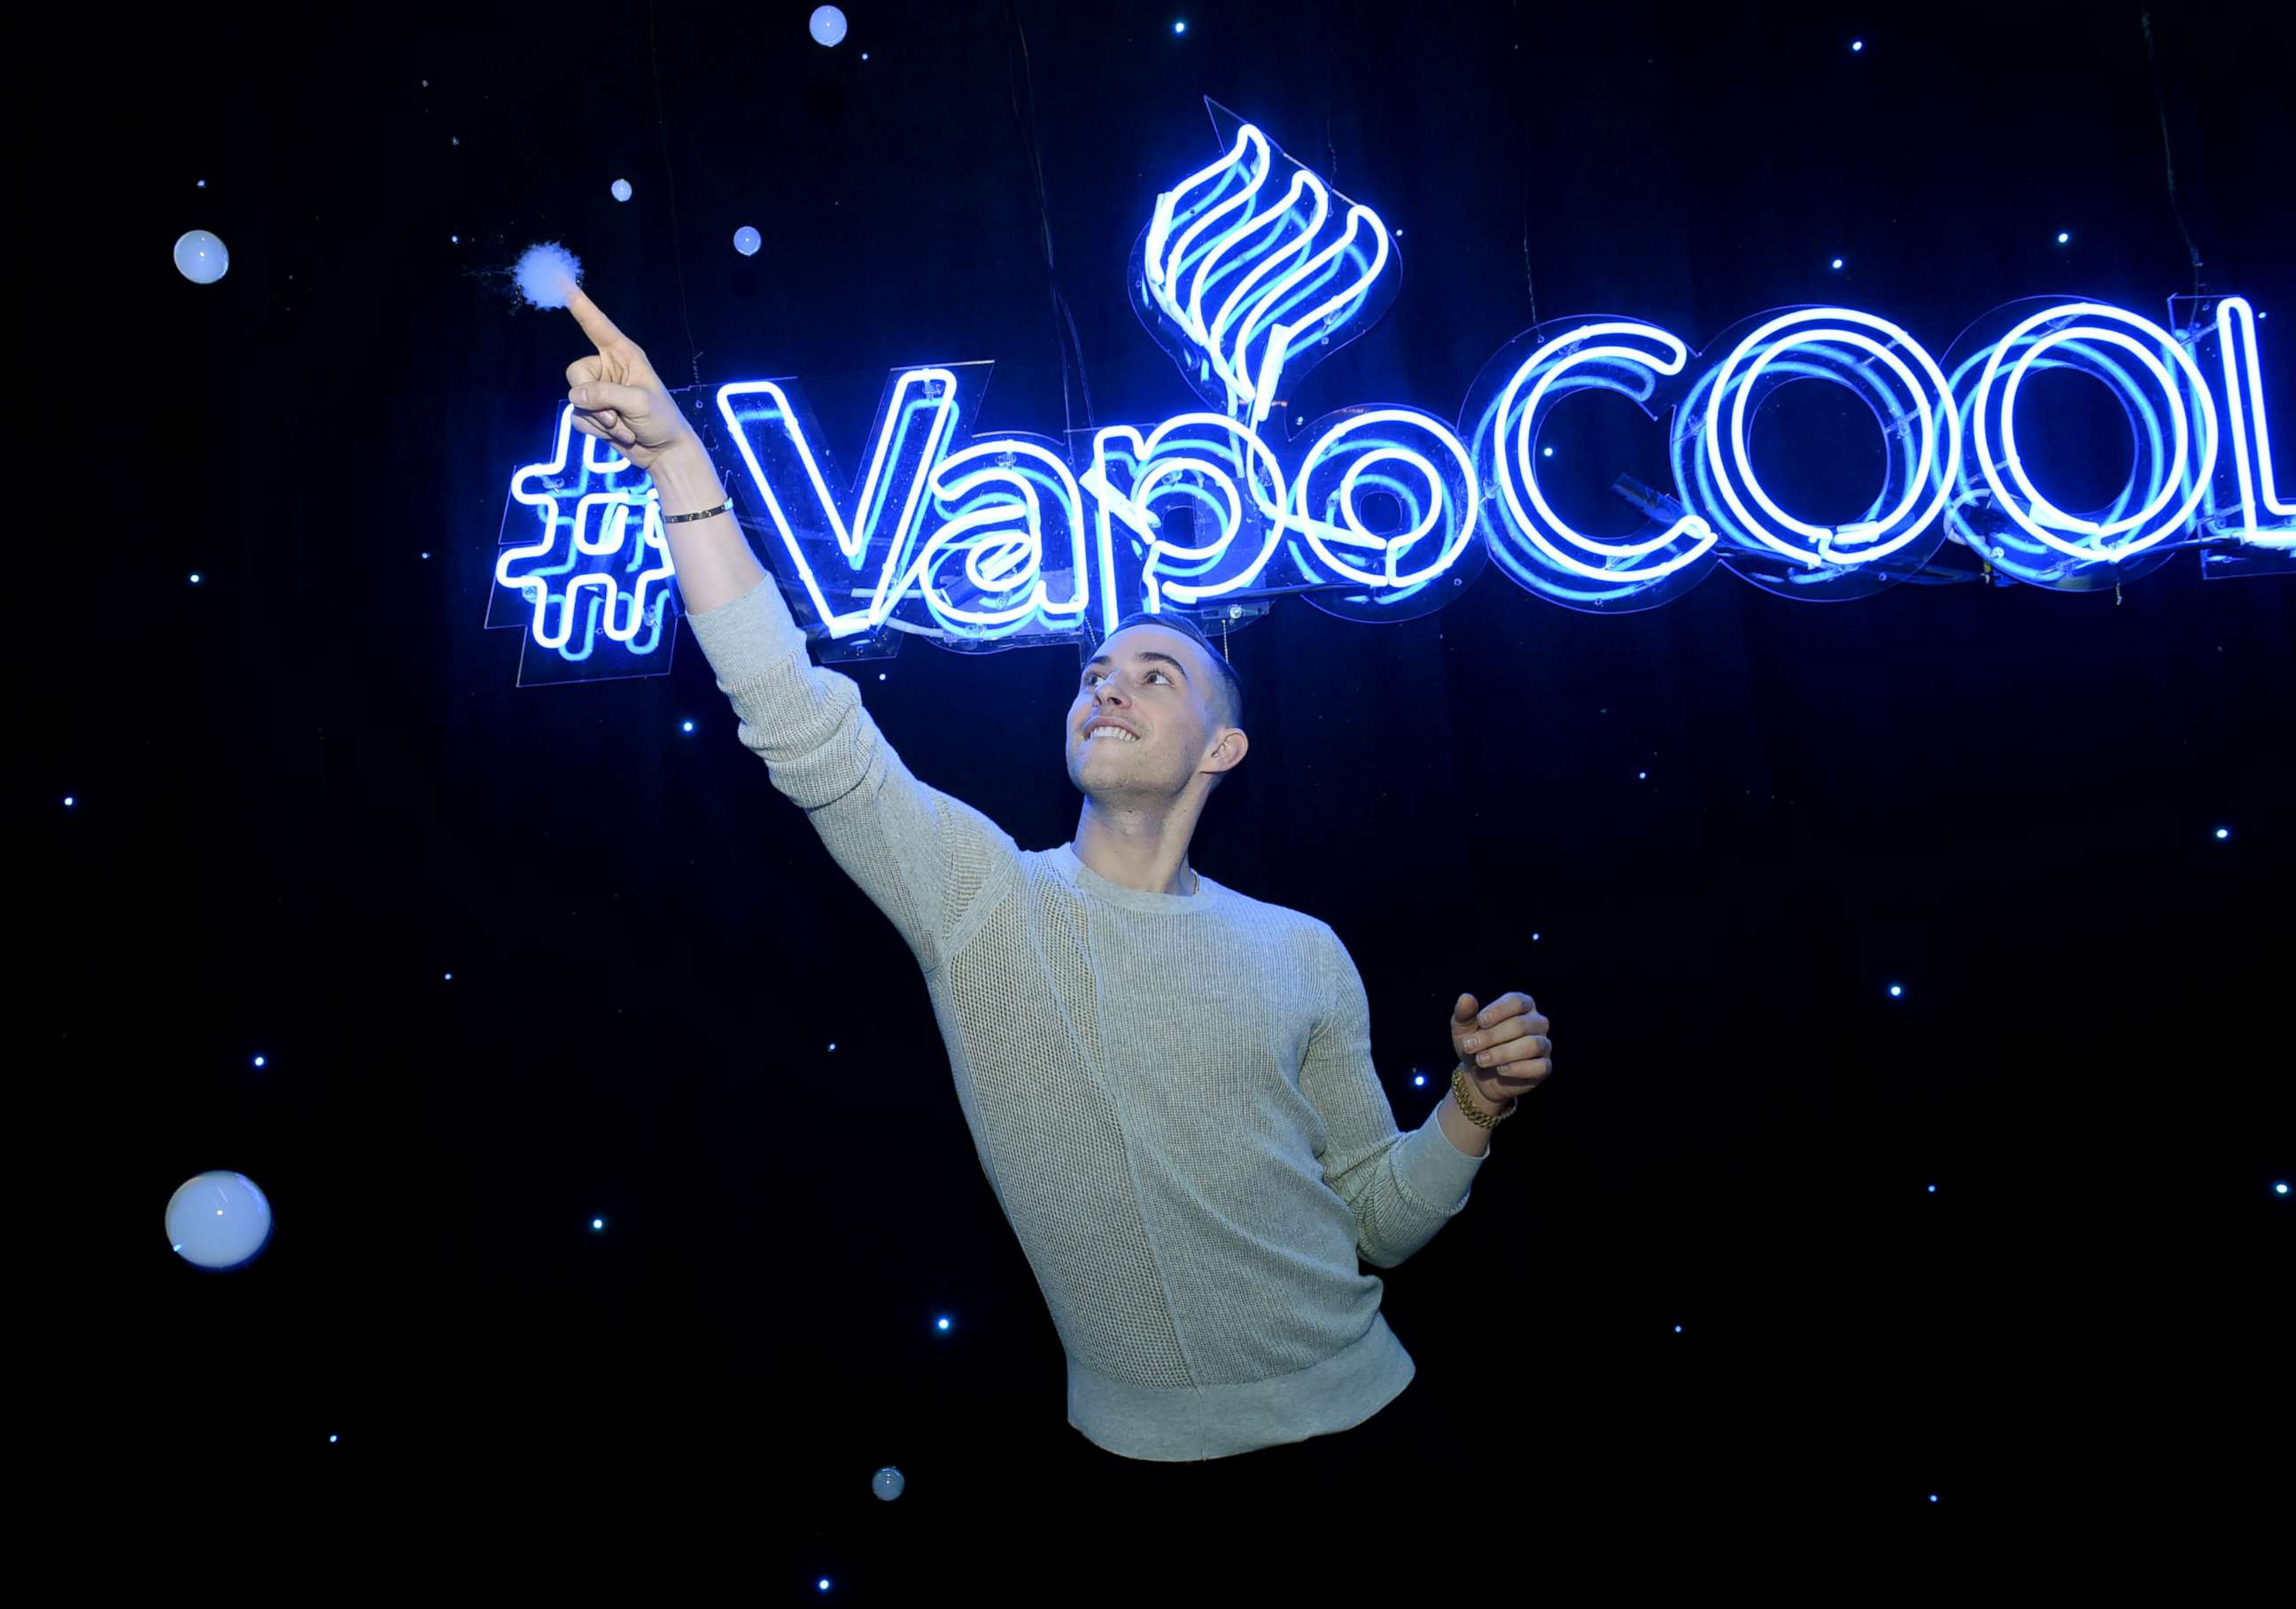 PHOTO: Adam Rippon poses at the NyQuil and DayQuil VapoCool experience in New York City on December 13, 2018.